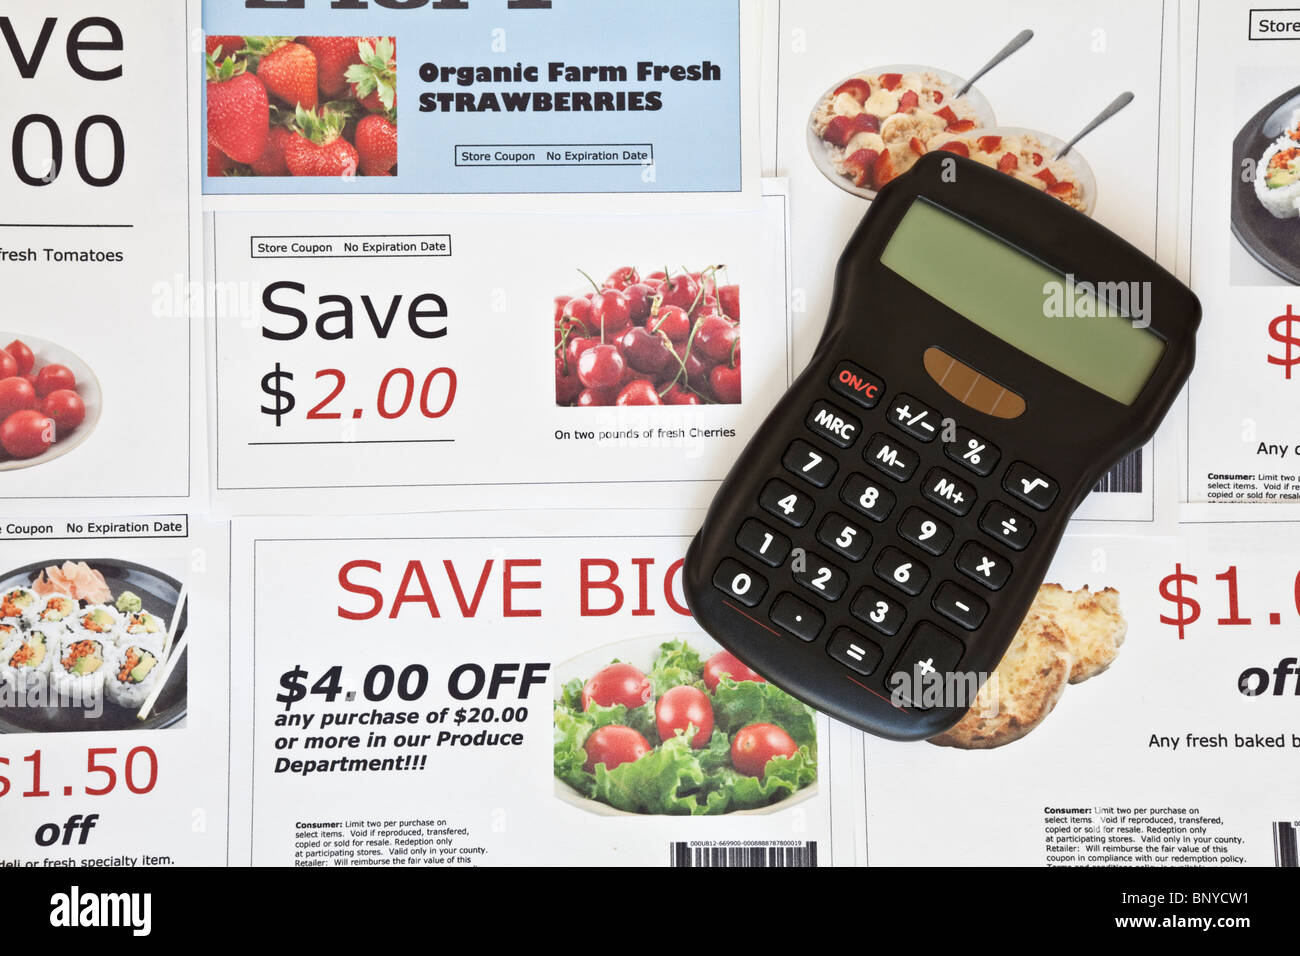 Fake coupon background with Calculator. All coupons were created by the photographer. Images in the coupons are the photographer Stock Photo